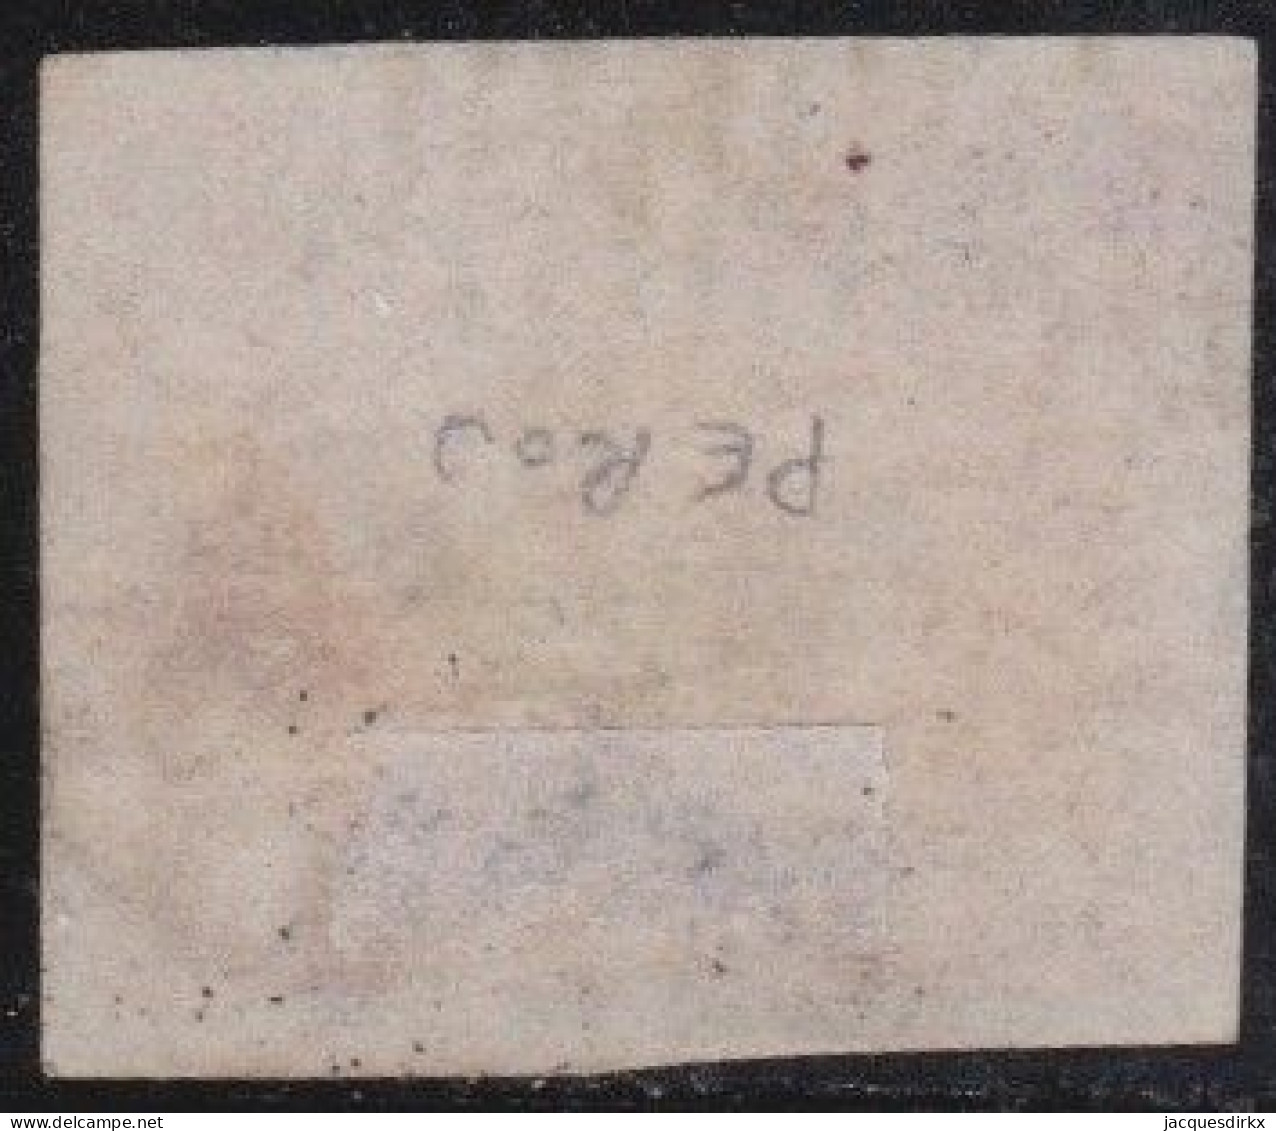 Bresil       .    Michel        .    Y&T (2 Scans)    .     O      .     Cancelled - Used Stamps